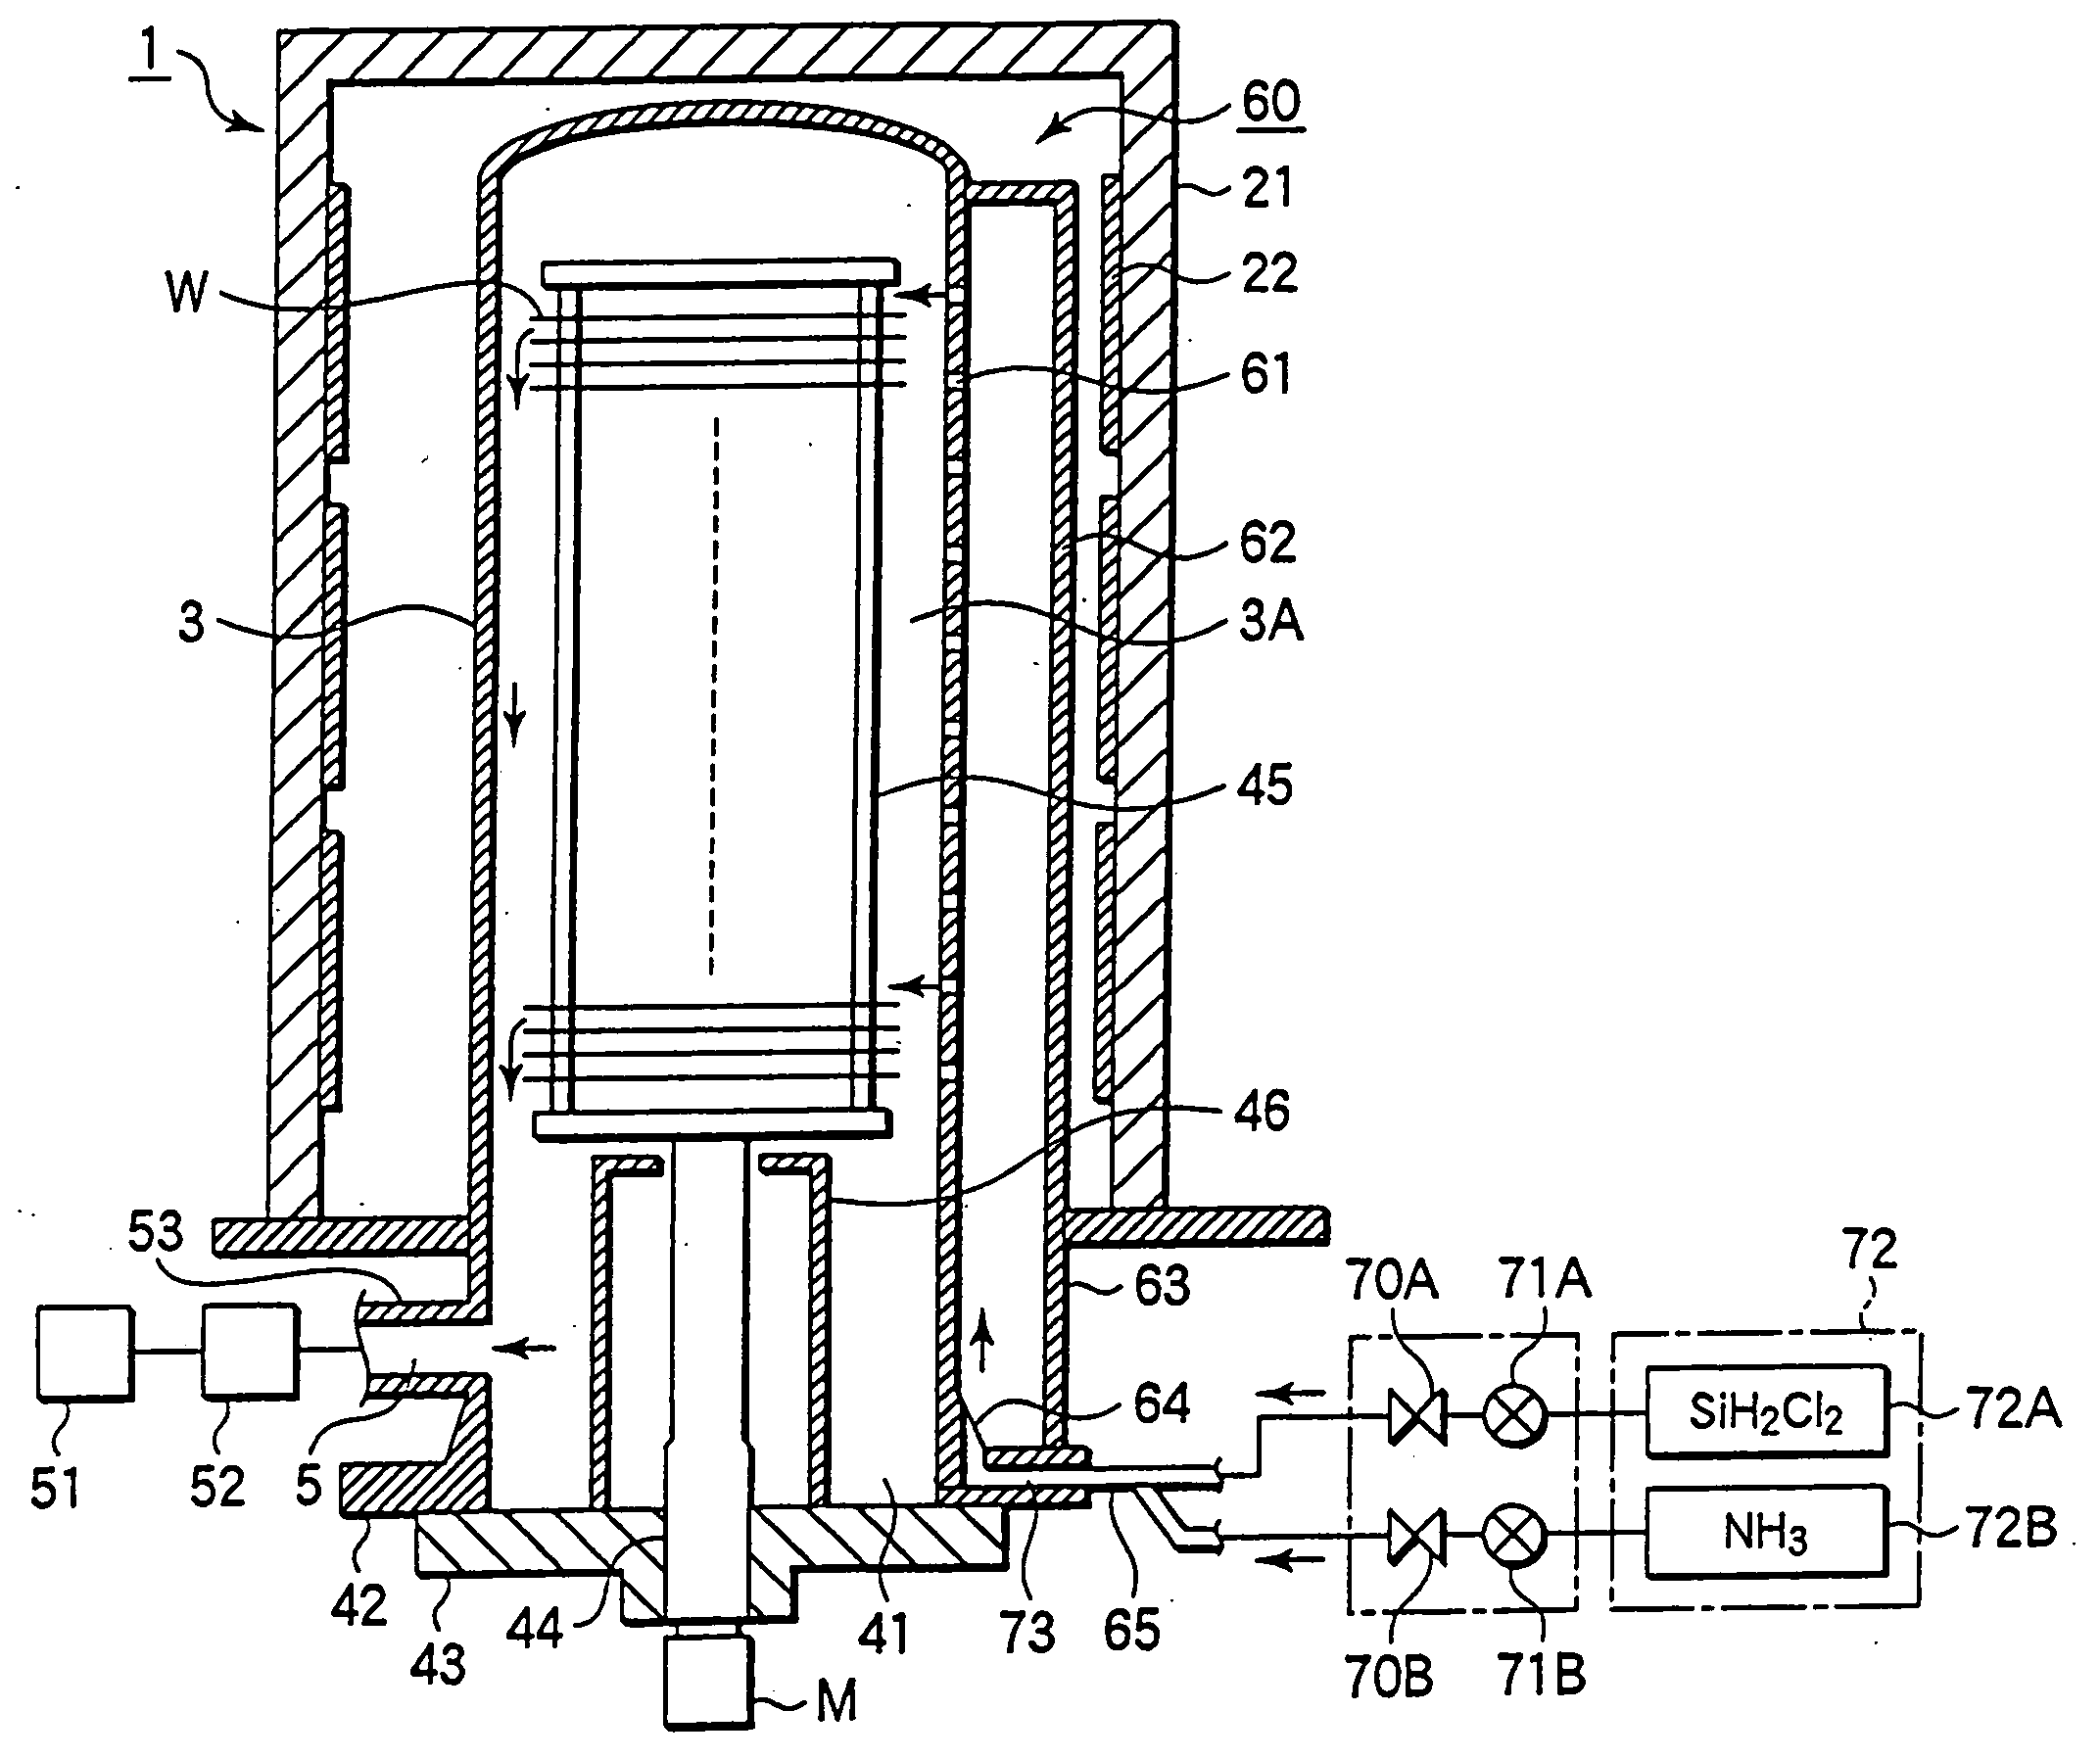 Heat processing apparatus for semiconductor process